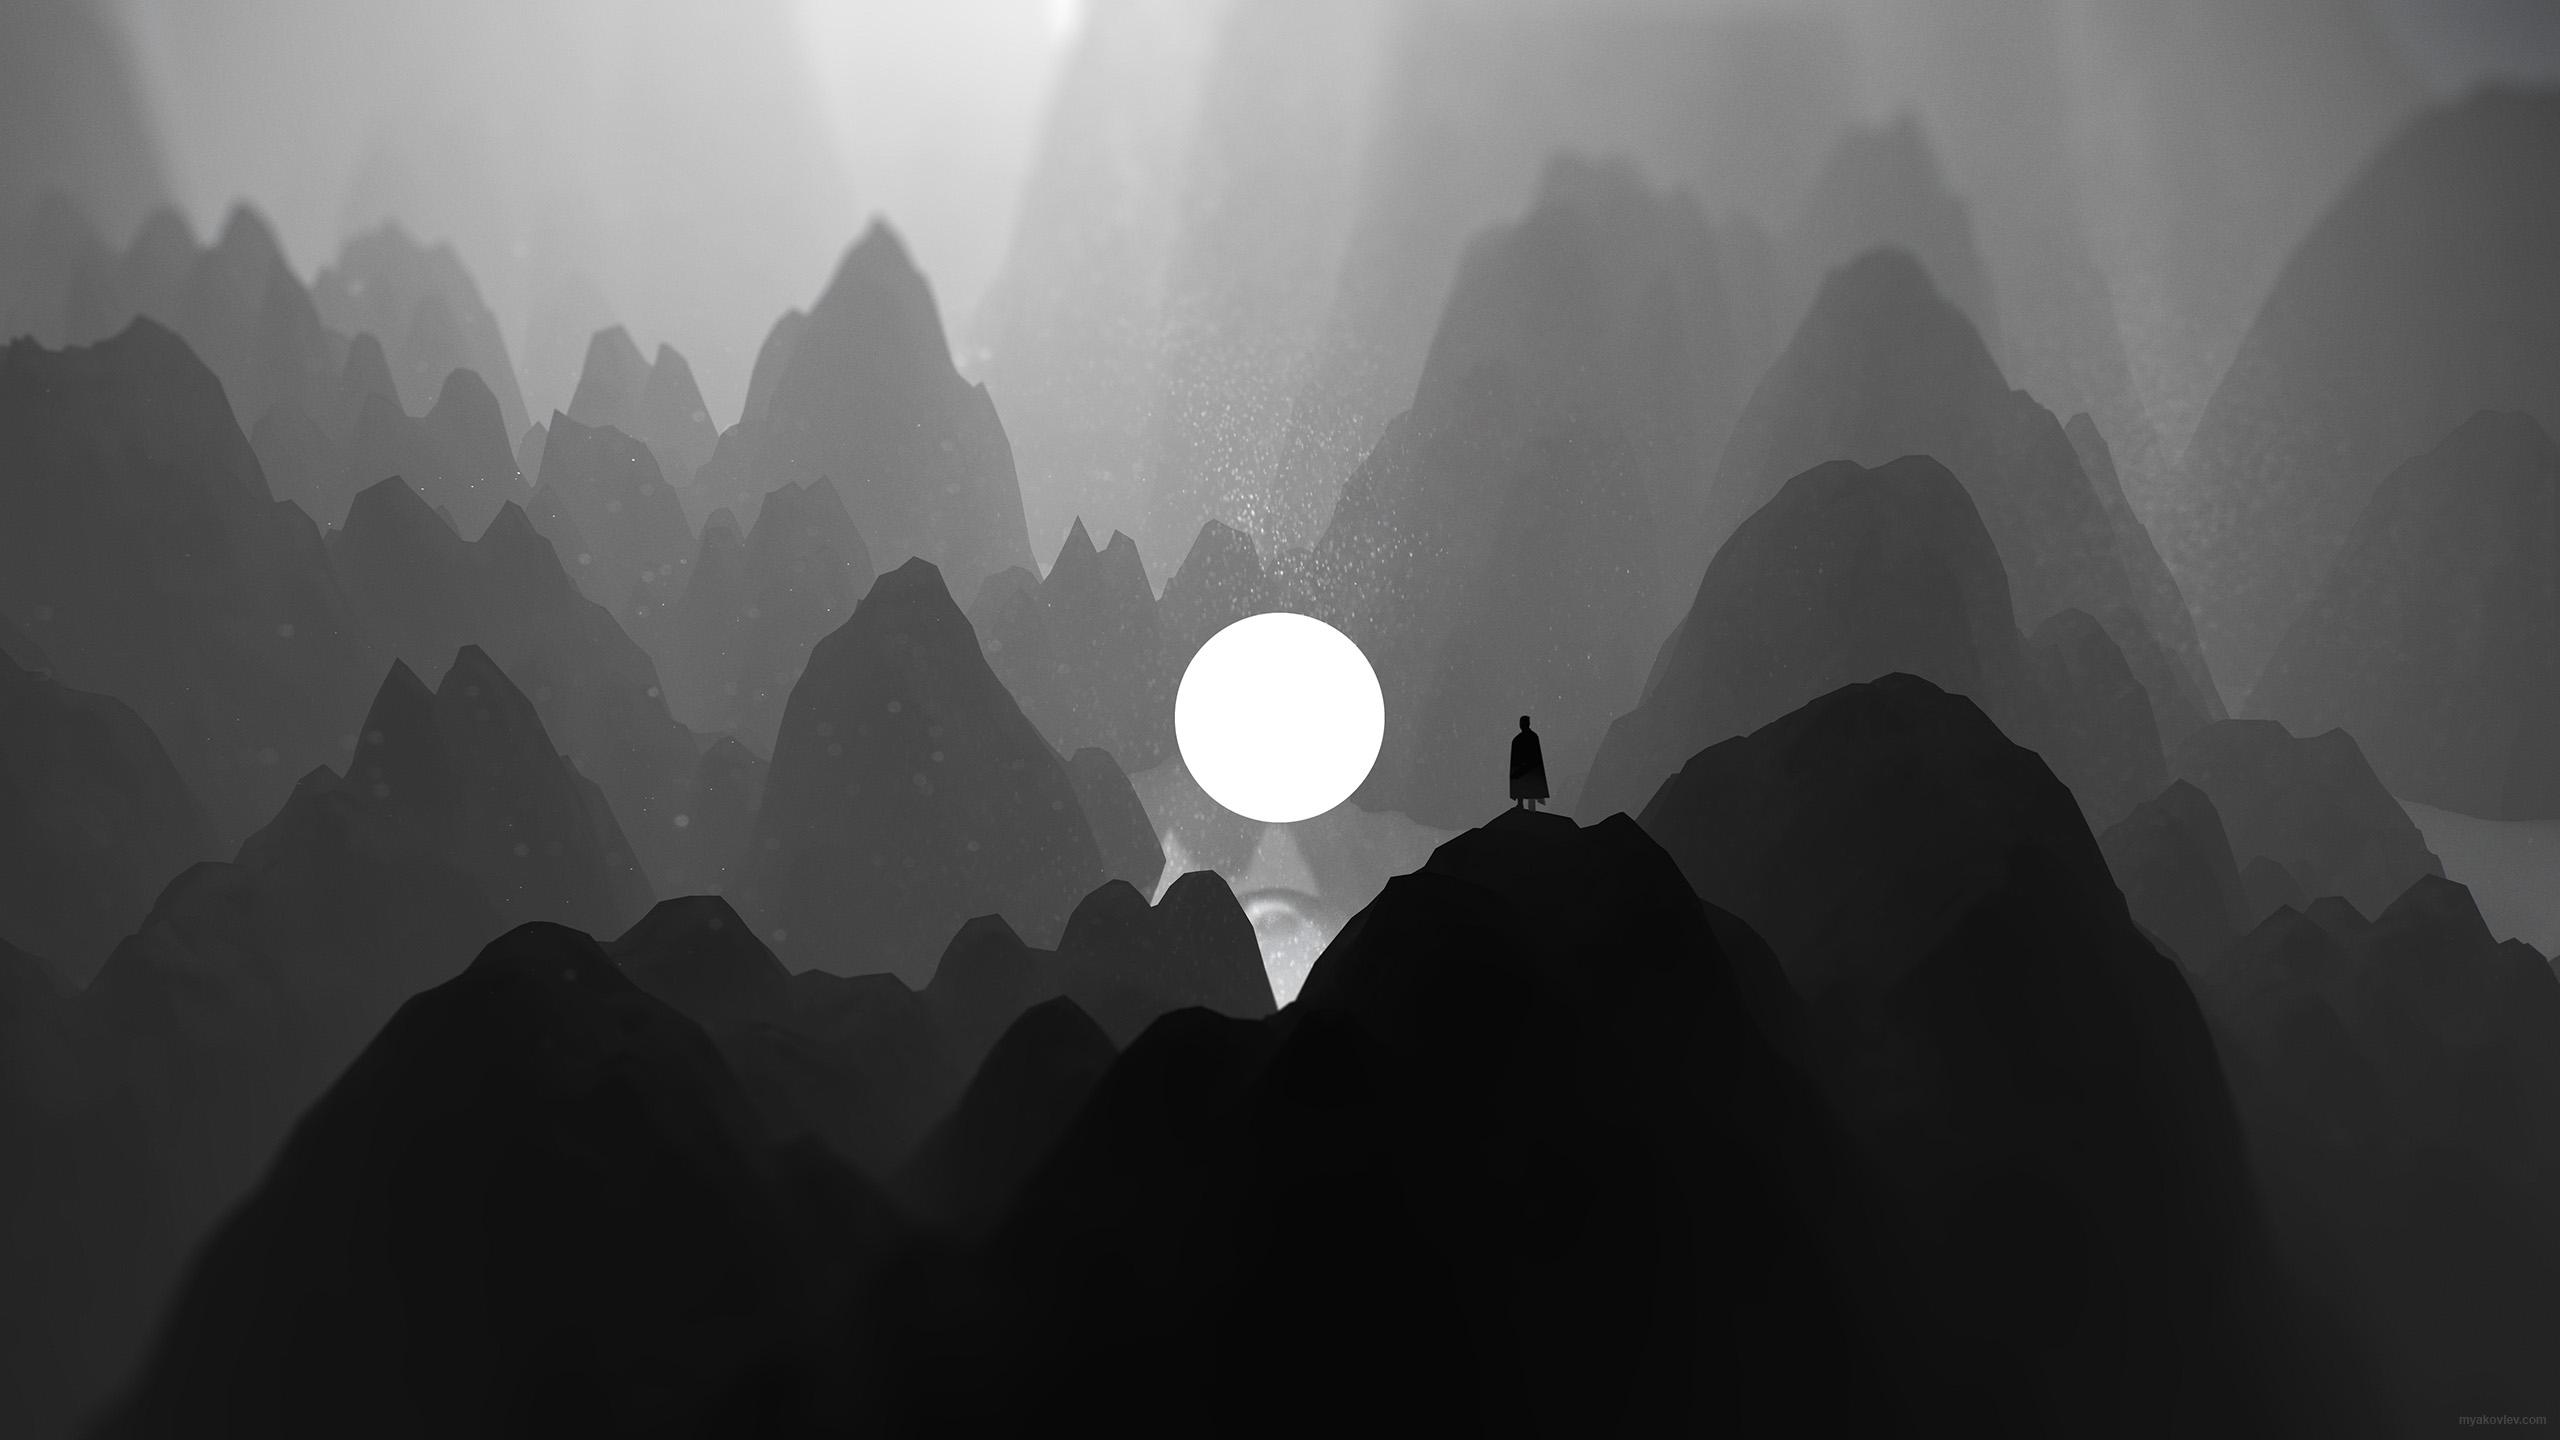 Minimalist Mountain Black And White Wallpapers - Wallpaper Cave 695